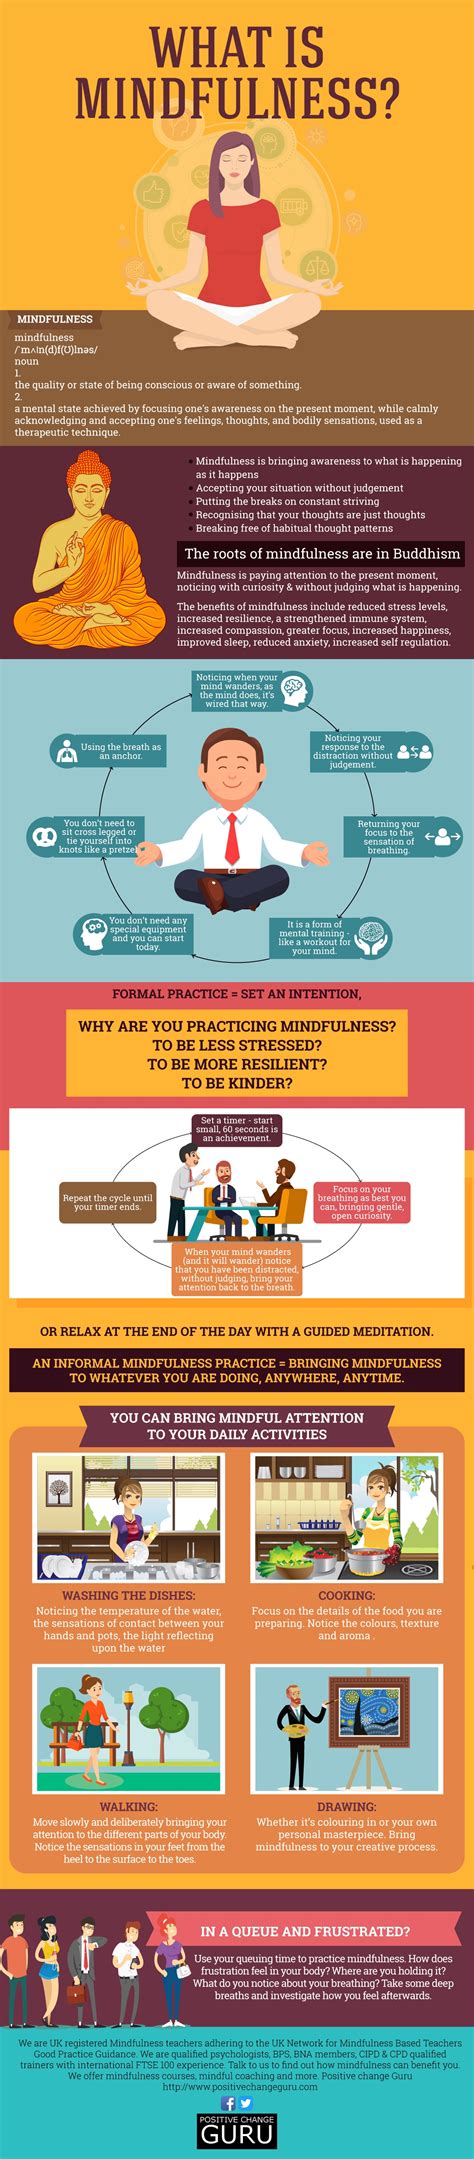 Mindfulness: Everything You Wanted to Know - Infographic